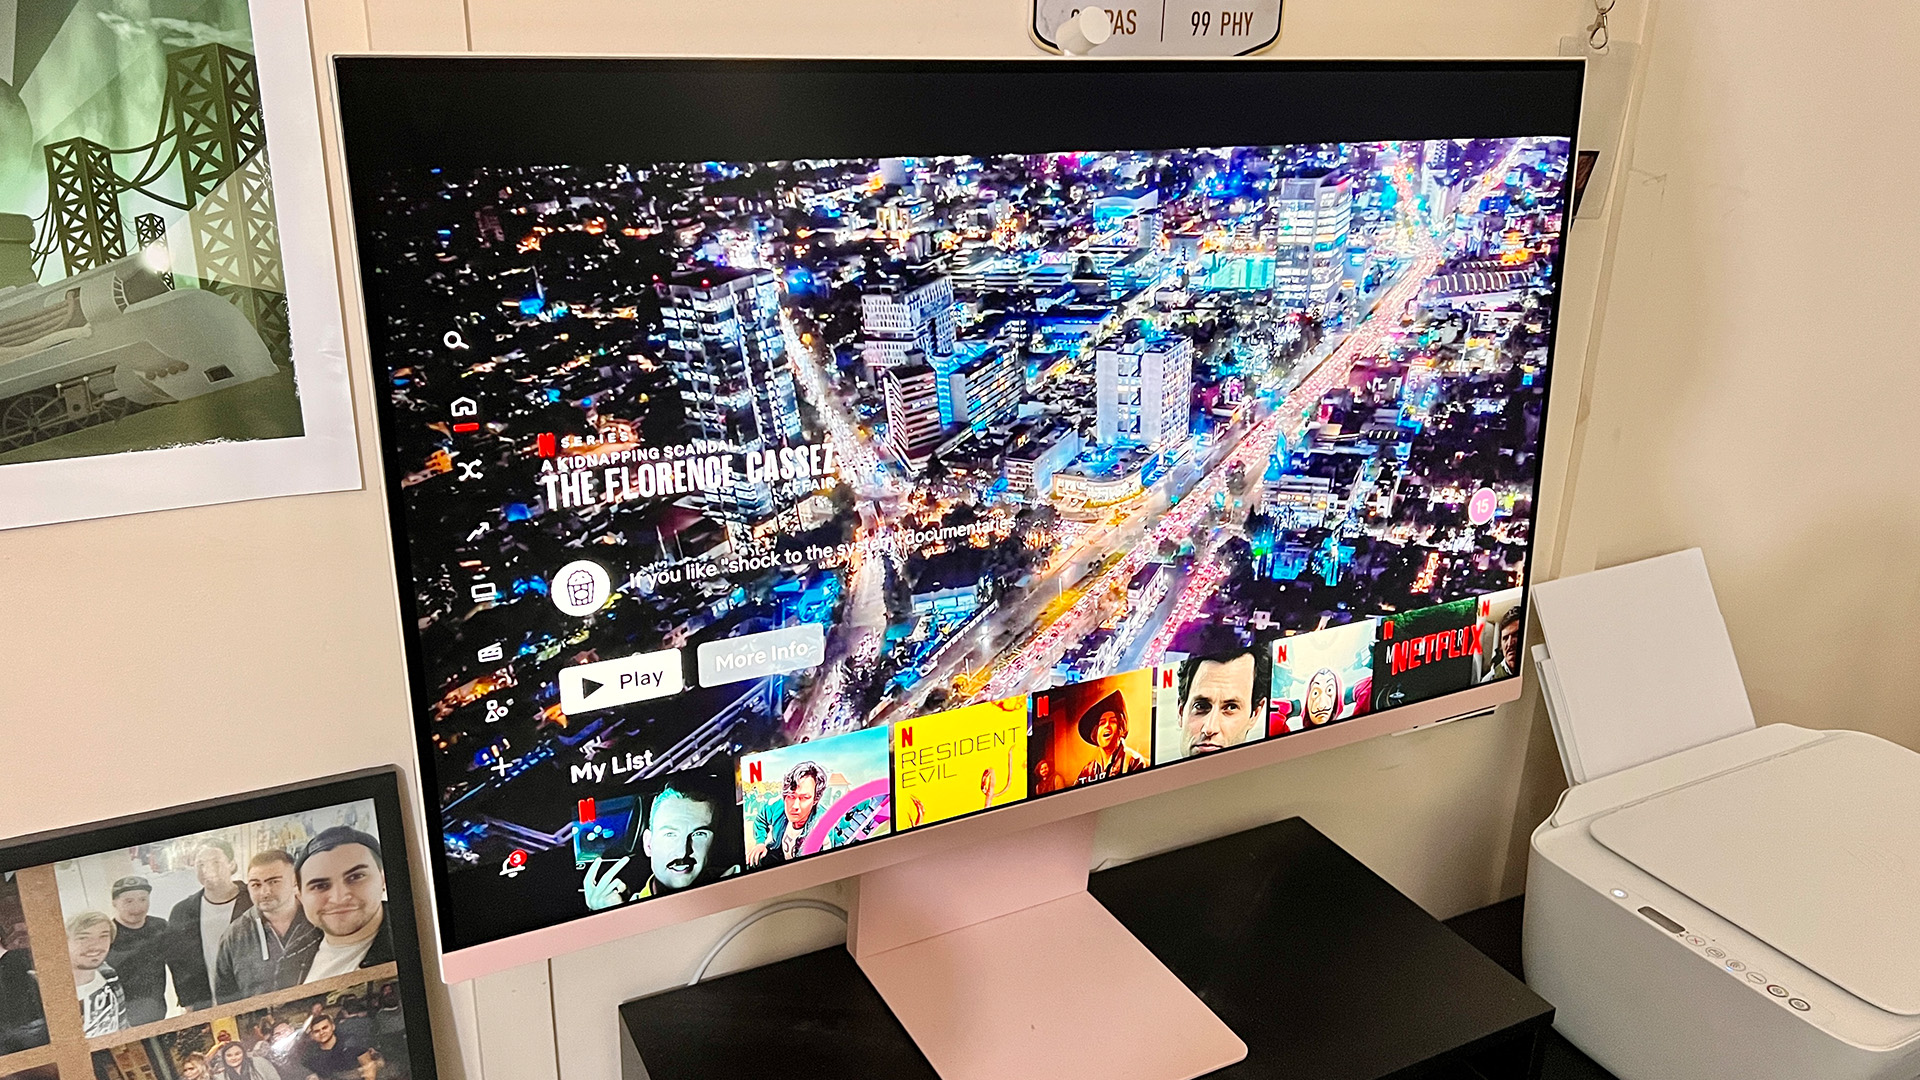 We tested the Samsung M8 Smart Monitor - it's the perfect TV for your desk